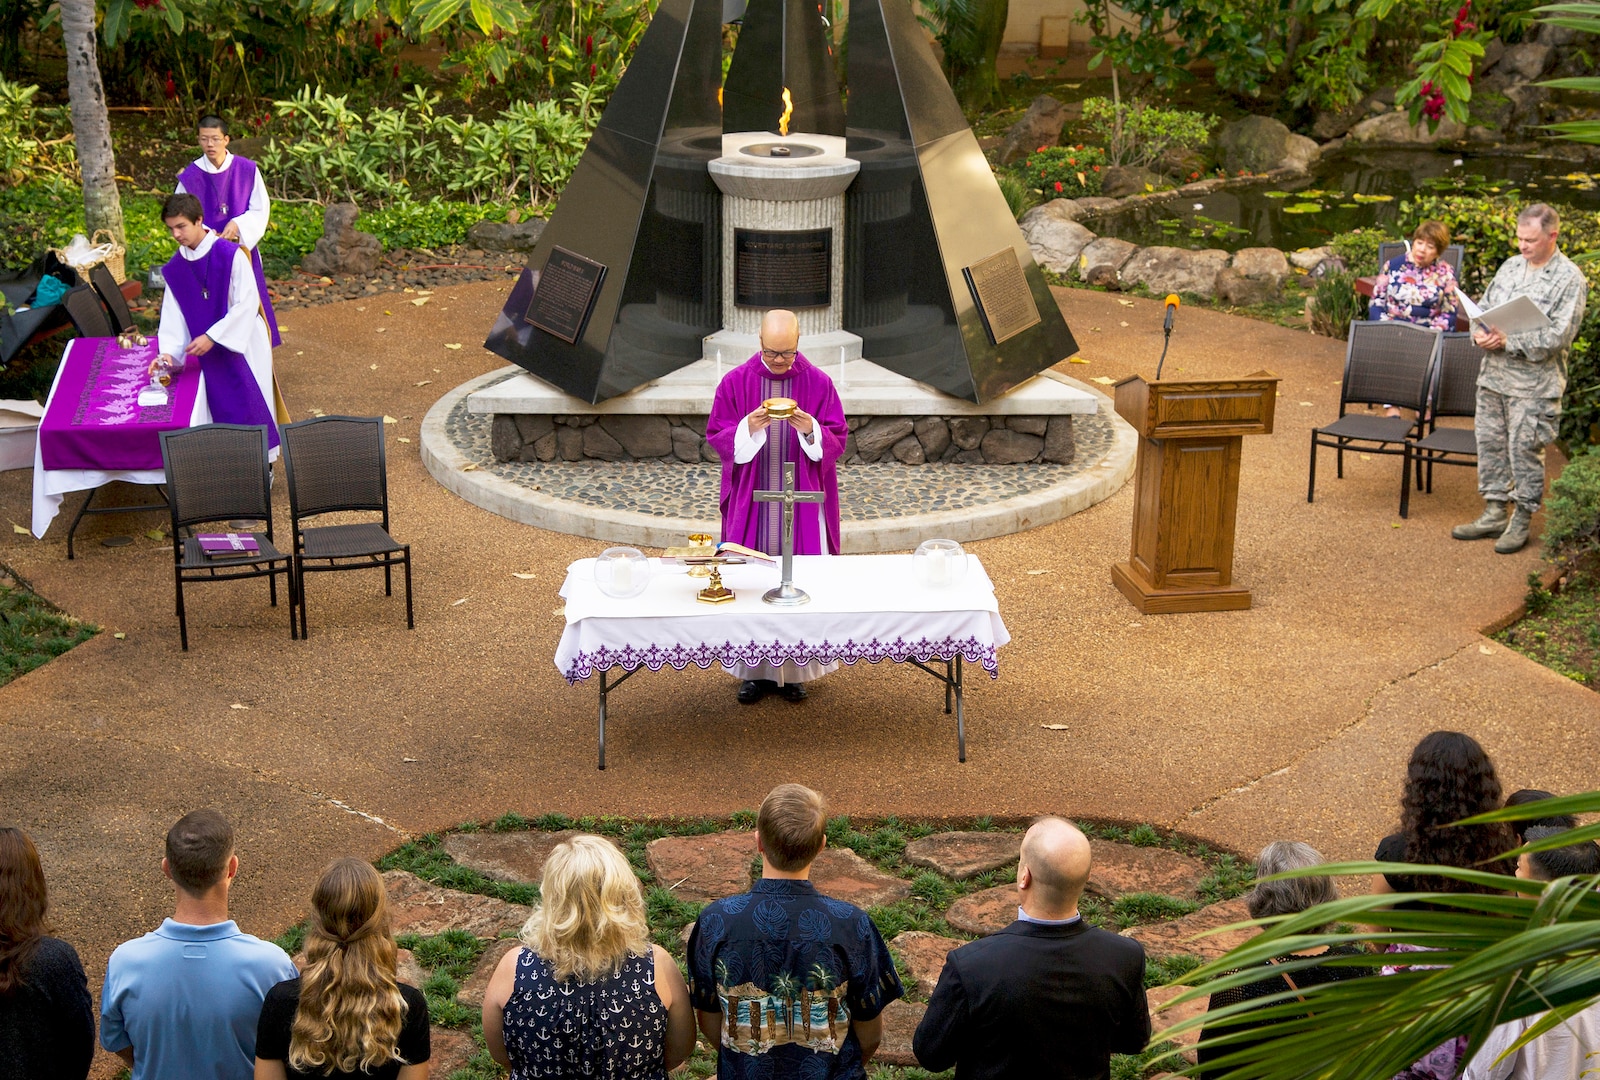 Navy Capt. John Shimotsu, U.S. Pacific Command Catholic chaplain, celebrates Mass at the Courtyard of Heroes during a remembrance ceremony at Joint Base Pearl Harbor-Hickam, Hawaii.